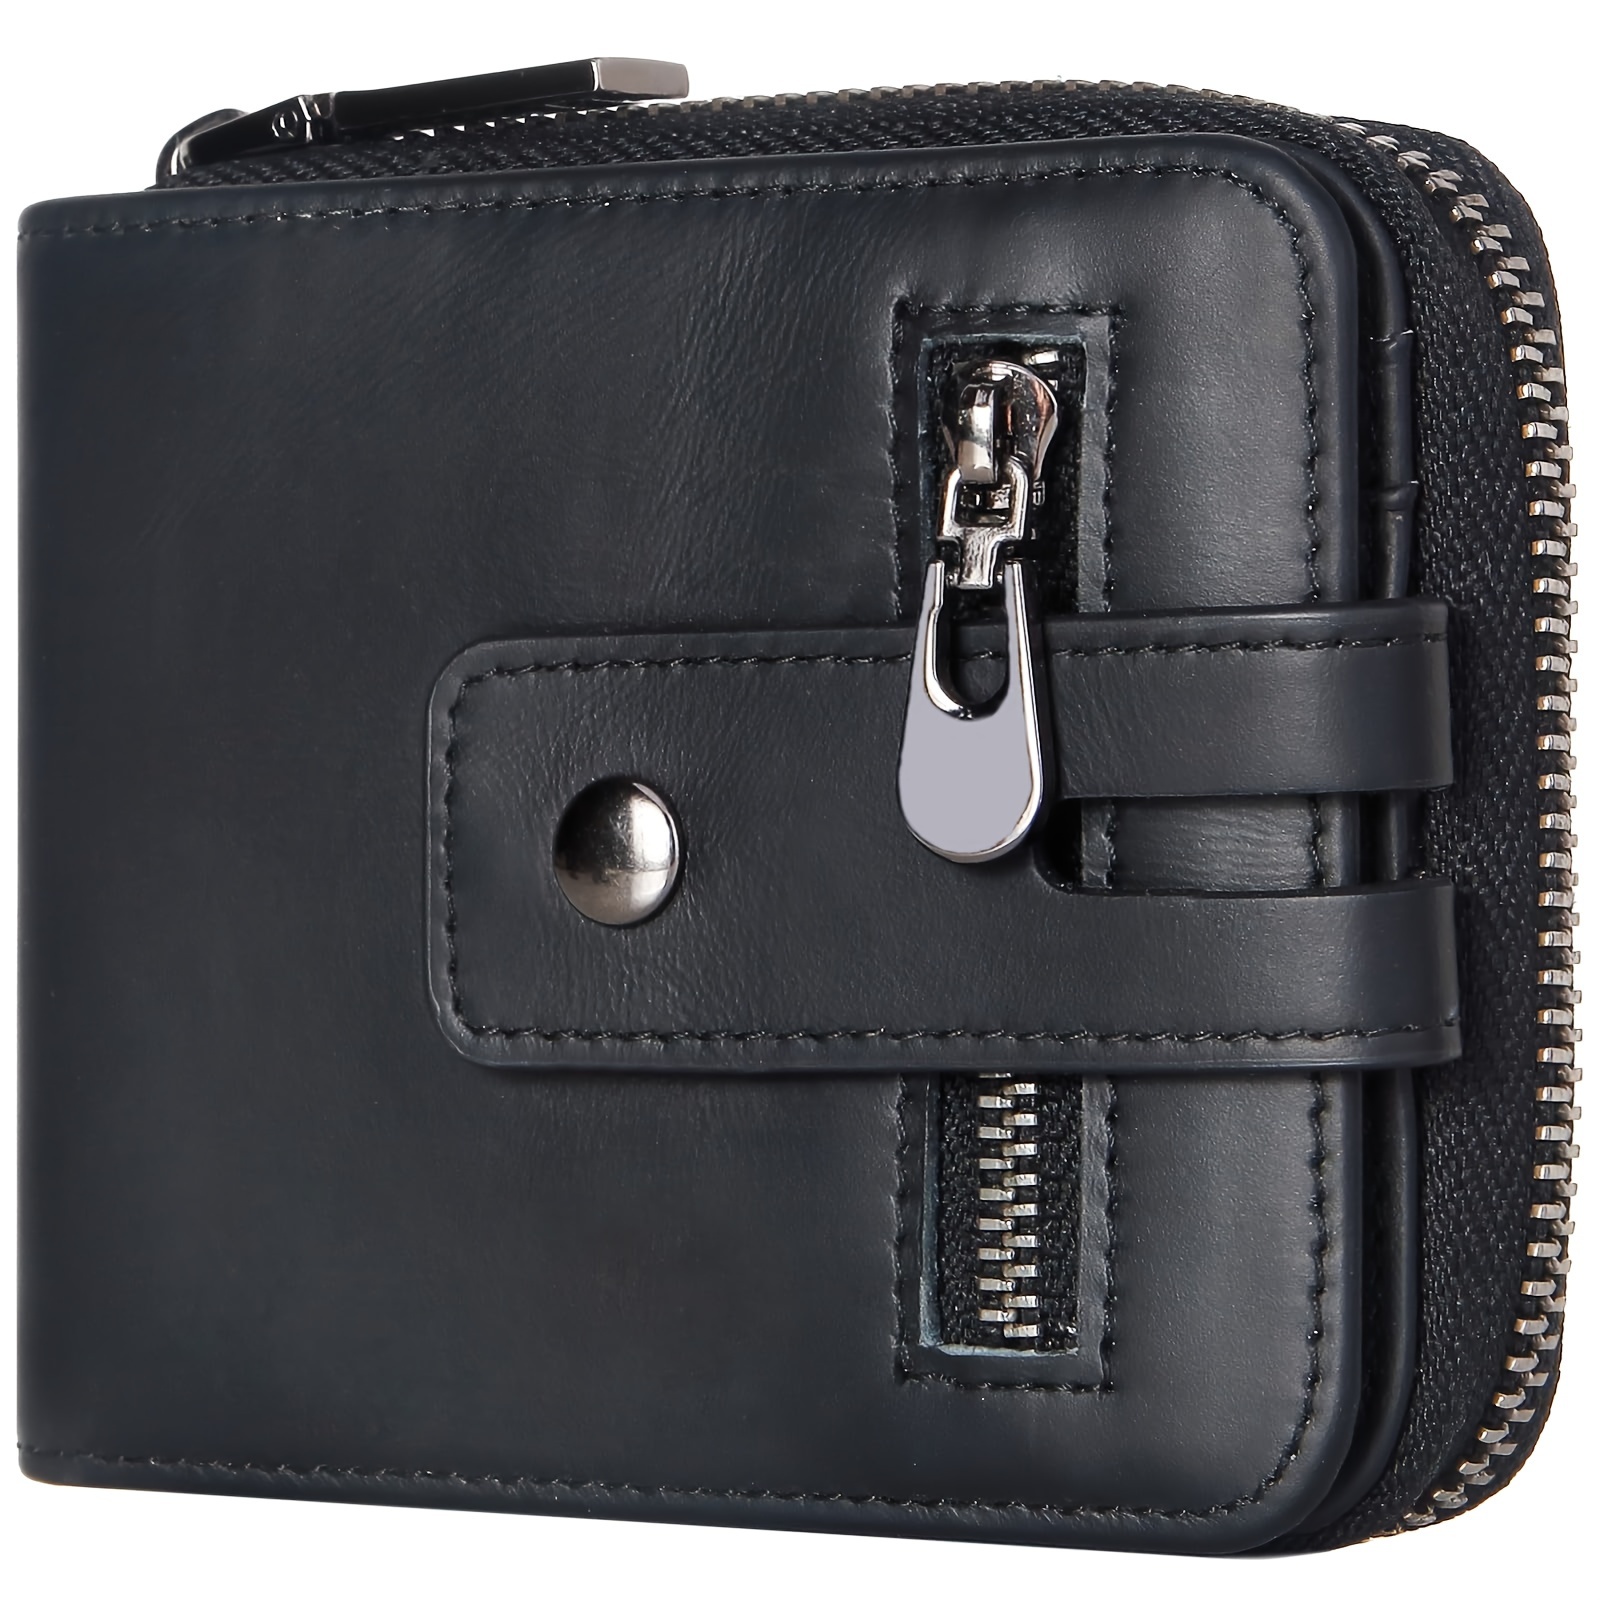 

Men's Genuine Leather Zipper Wallet With Rfid Blocking, Bifold With Id Window, Coin Pocket, And Gift Box, Casual Style